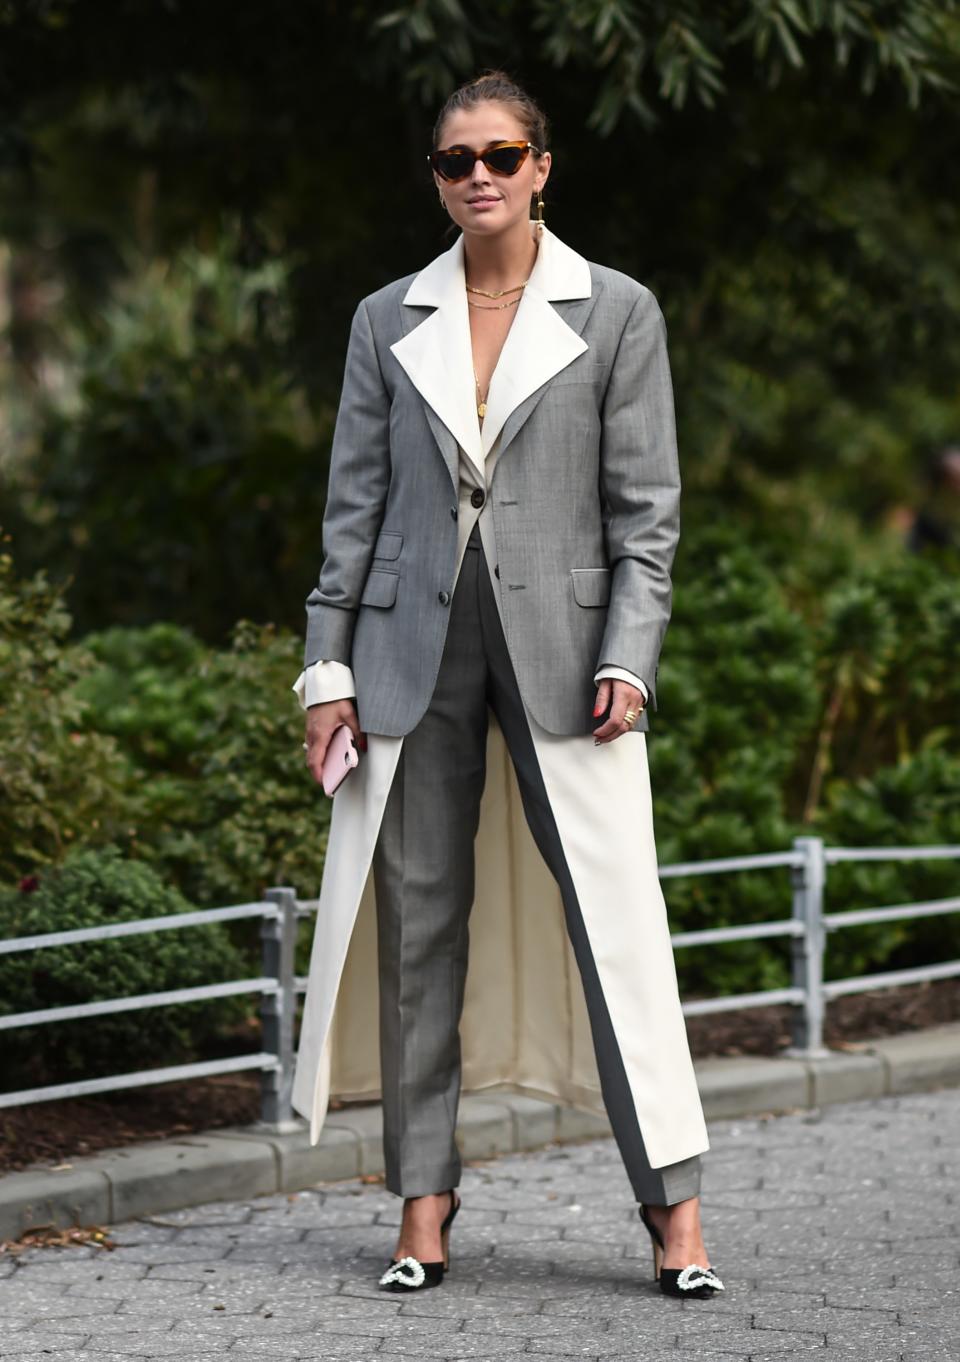 Layer a floor-length coat between your trousers and blazer, and forget what you thought you knew about wearing suits.